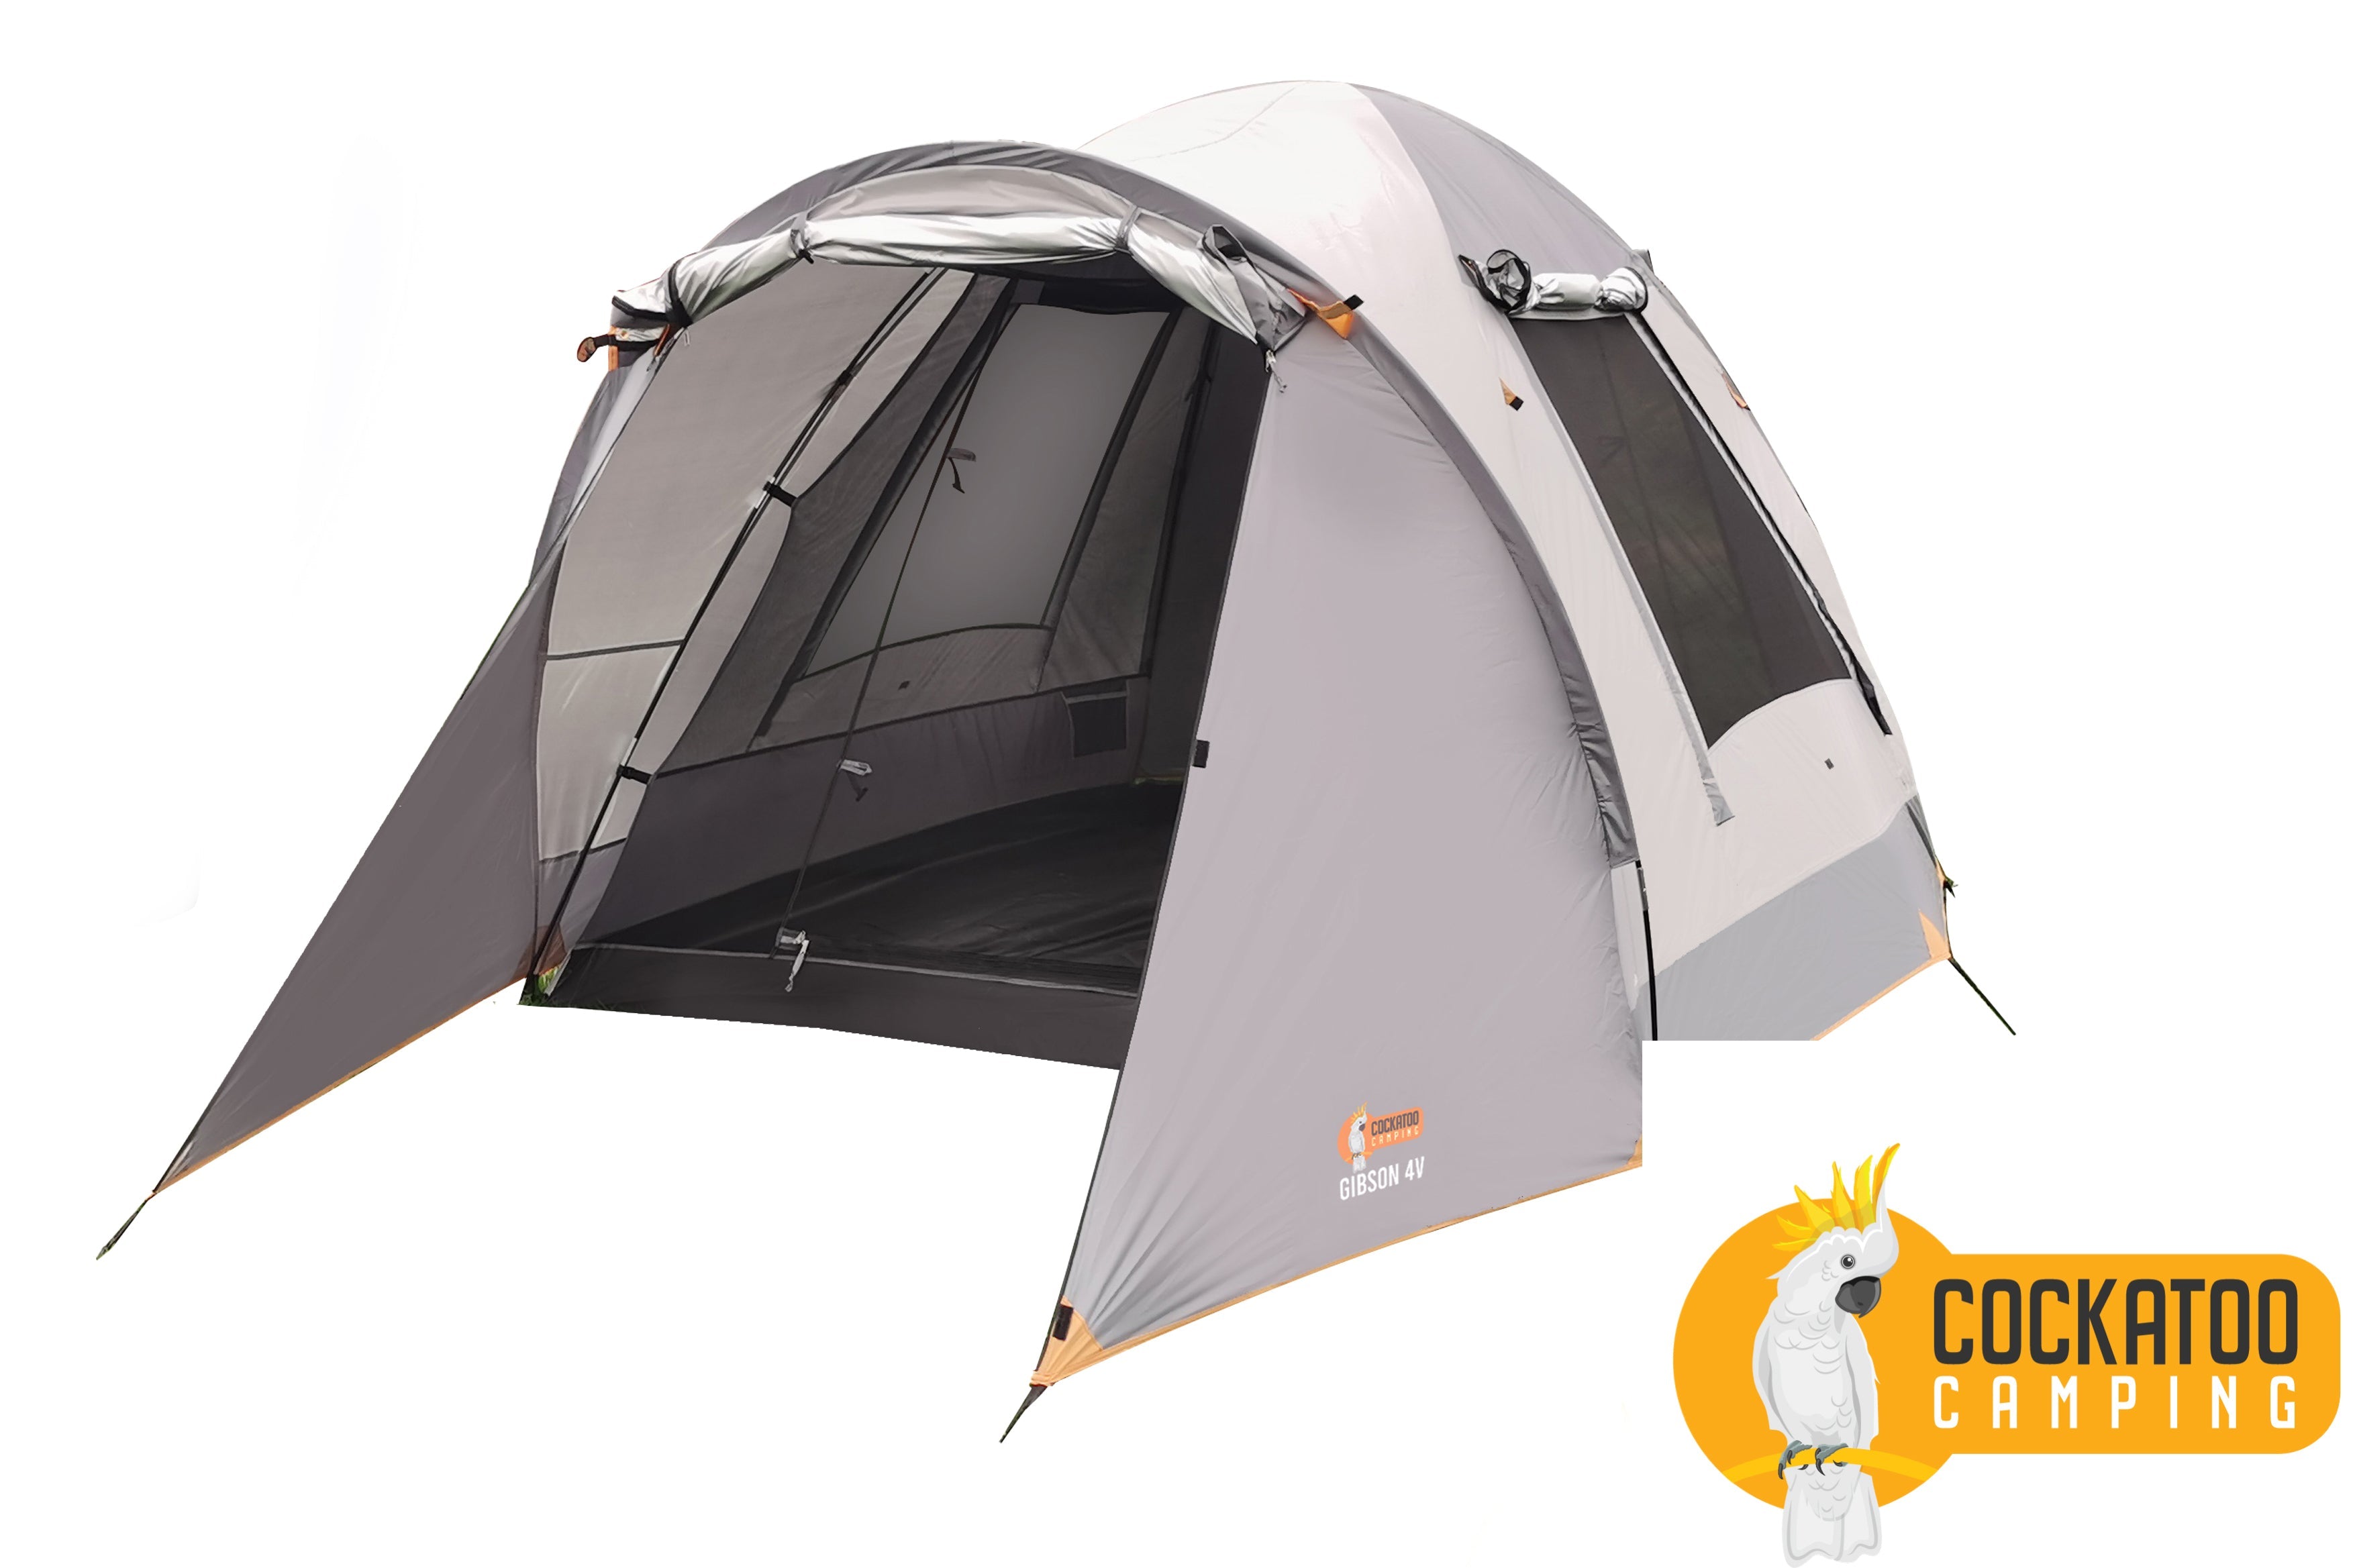 GIBSON 4V DOME TENT